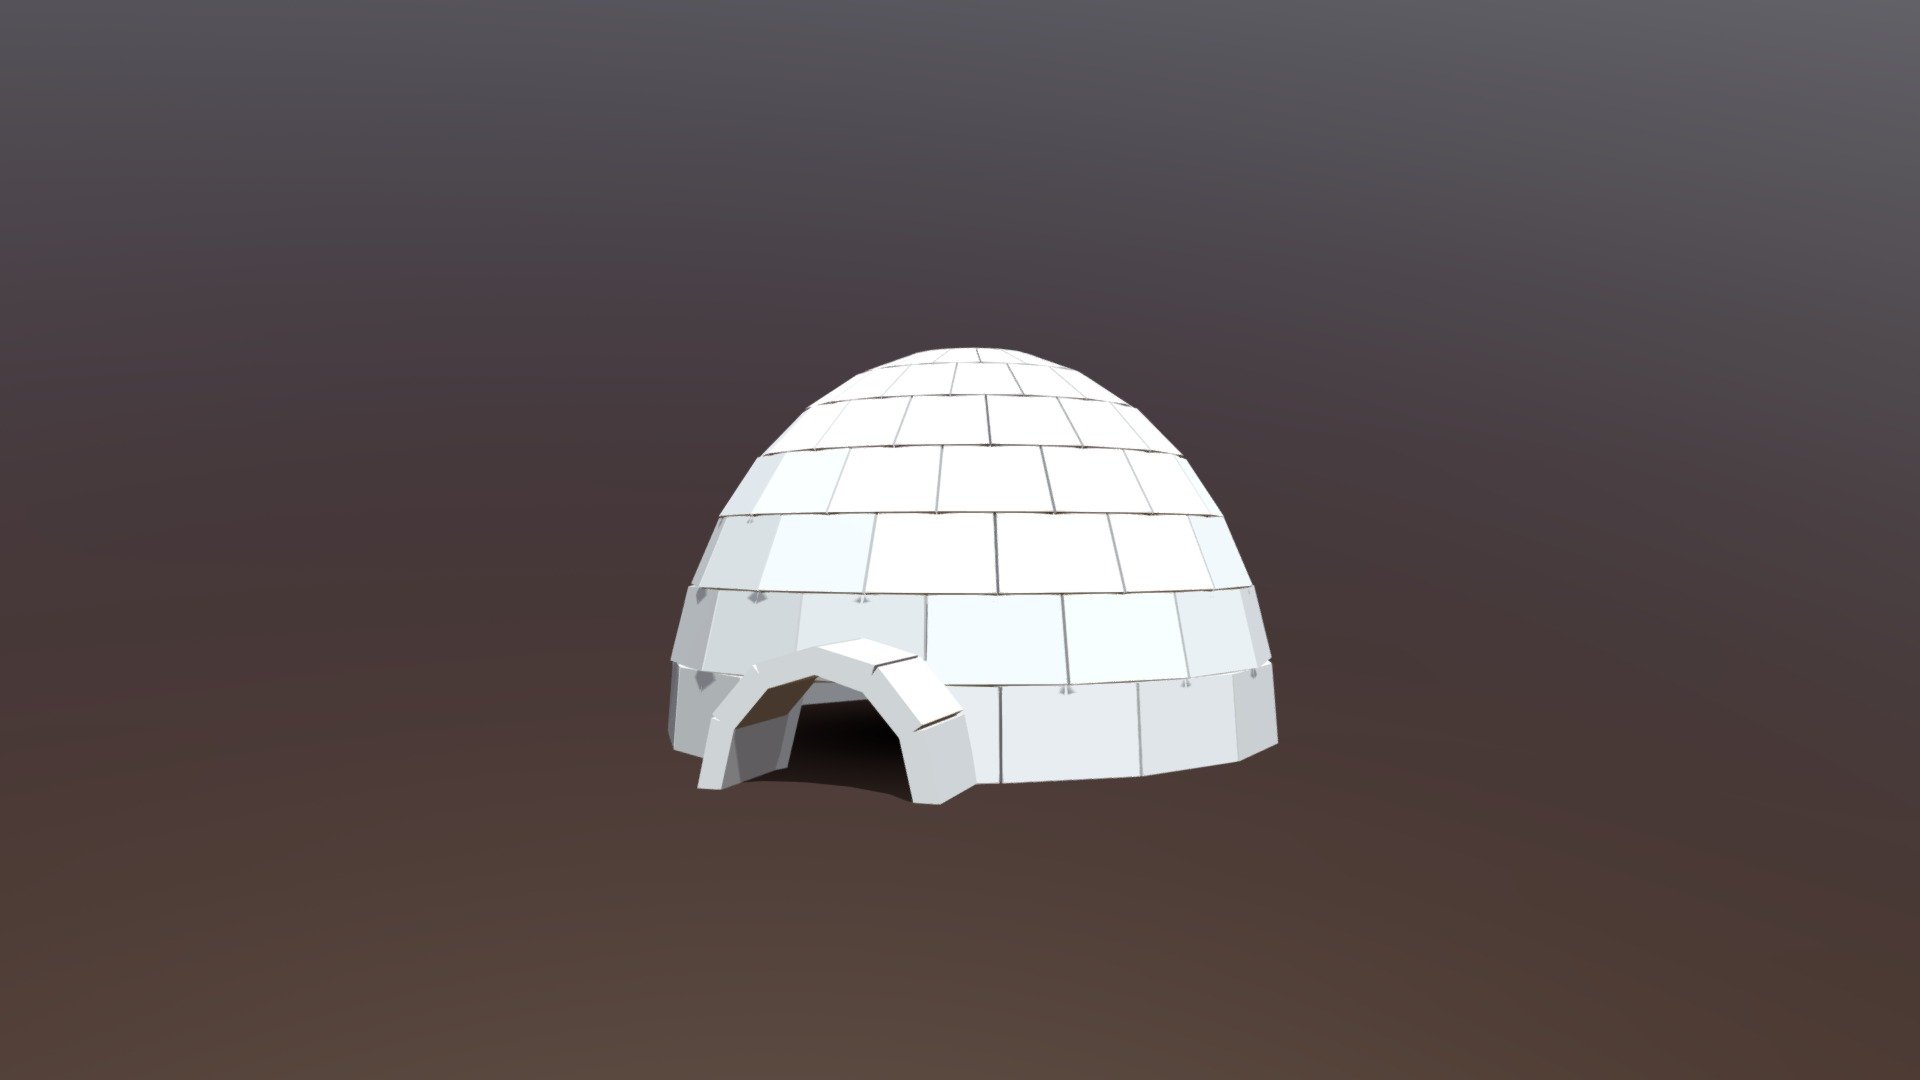 This is a low poly 3d model of a igloo. The low poly igloo was modelled and prepared for low-poly style renderings, background, general CG visualization presented as a mesh with quads only.

Verts : 1.040 Faces: 780

This model have simple materials with diffuse colors.

No ring, maps and no UVW mapping is available.

The original file was created in blender. You will receive a 3DS, OBJ, FBX, blend, DAE, Stl.

All preview images were rendered with Blender Cycles. Product is ready to render out-of-the-box. Please note that the lights, cameras, and background is only included in the .blend file. The model is clean and alone in the other provided files, centred at origin and has real-world scale 3d model